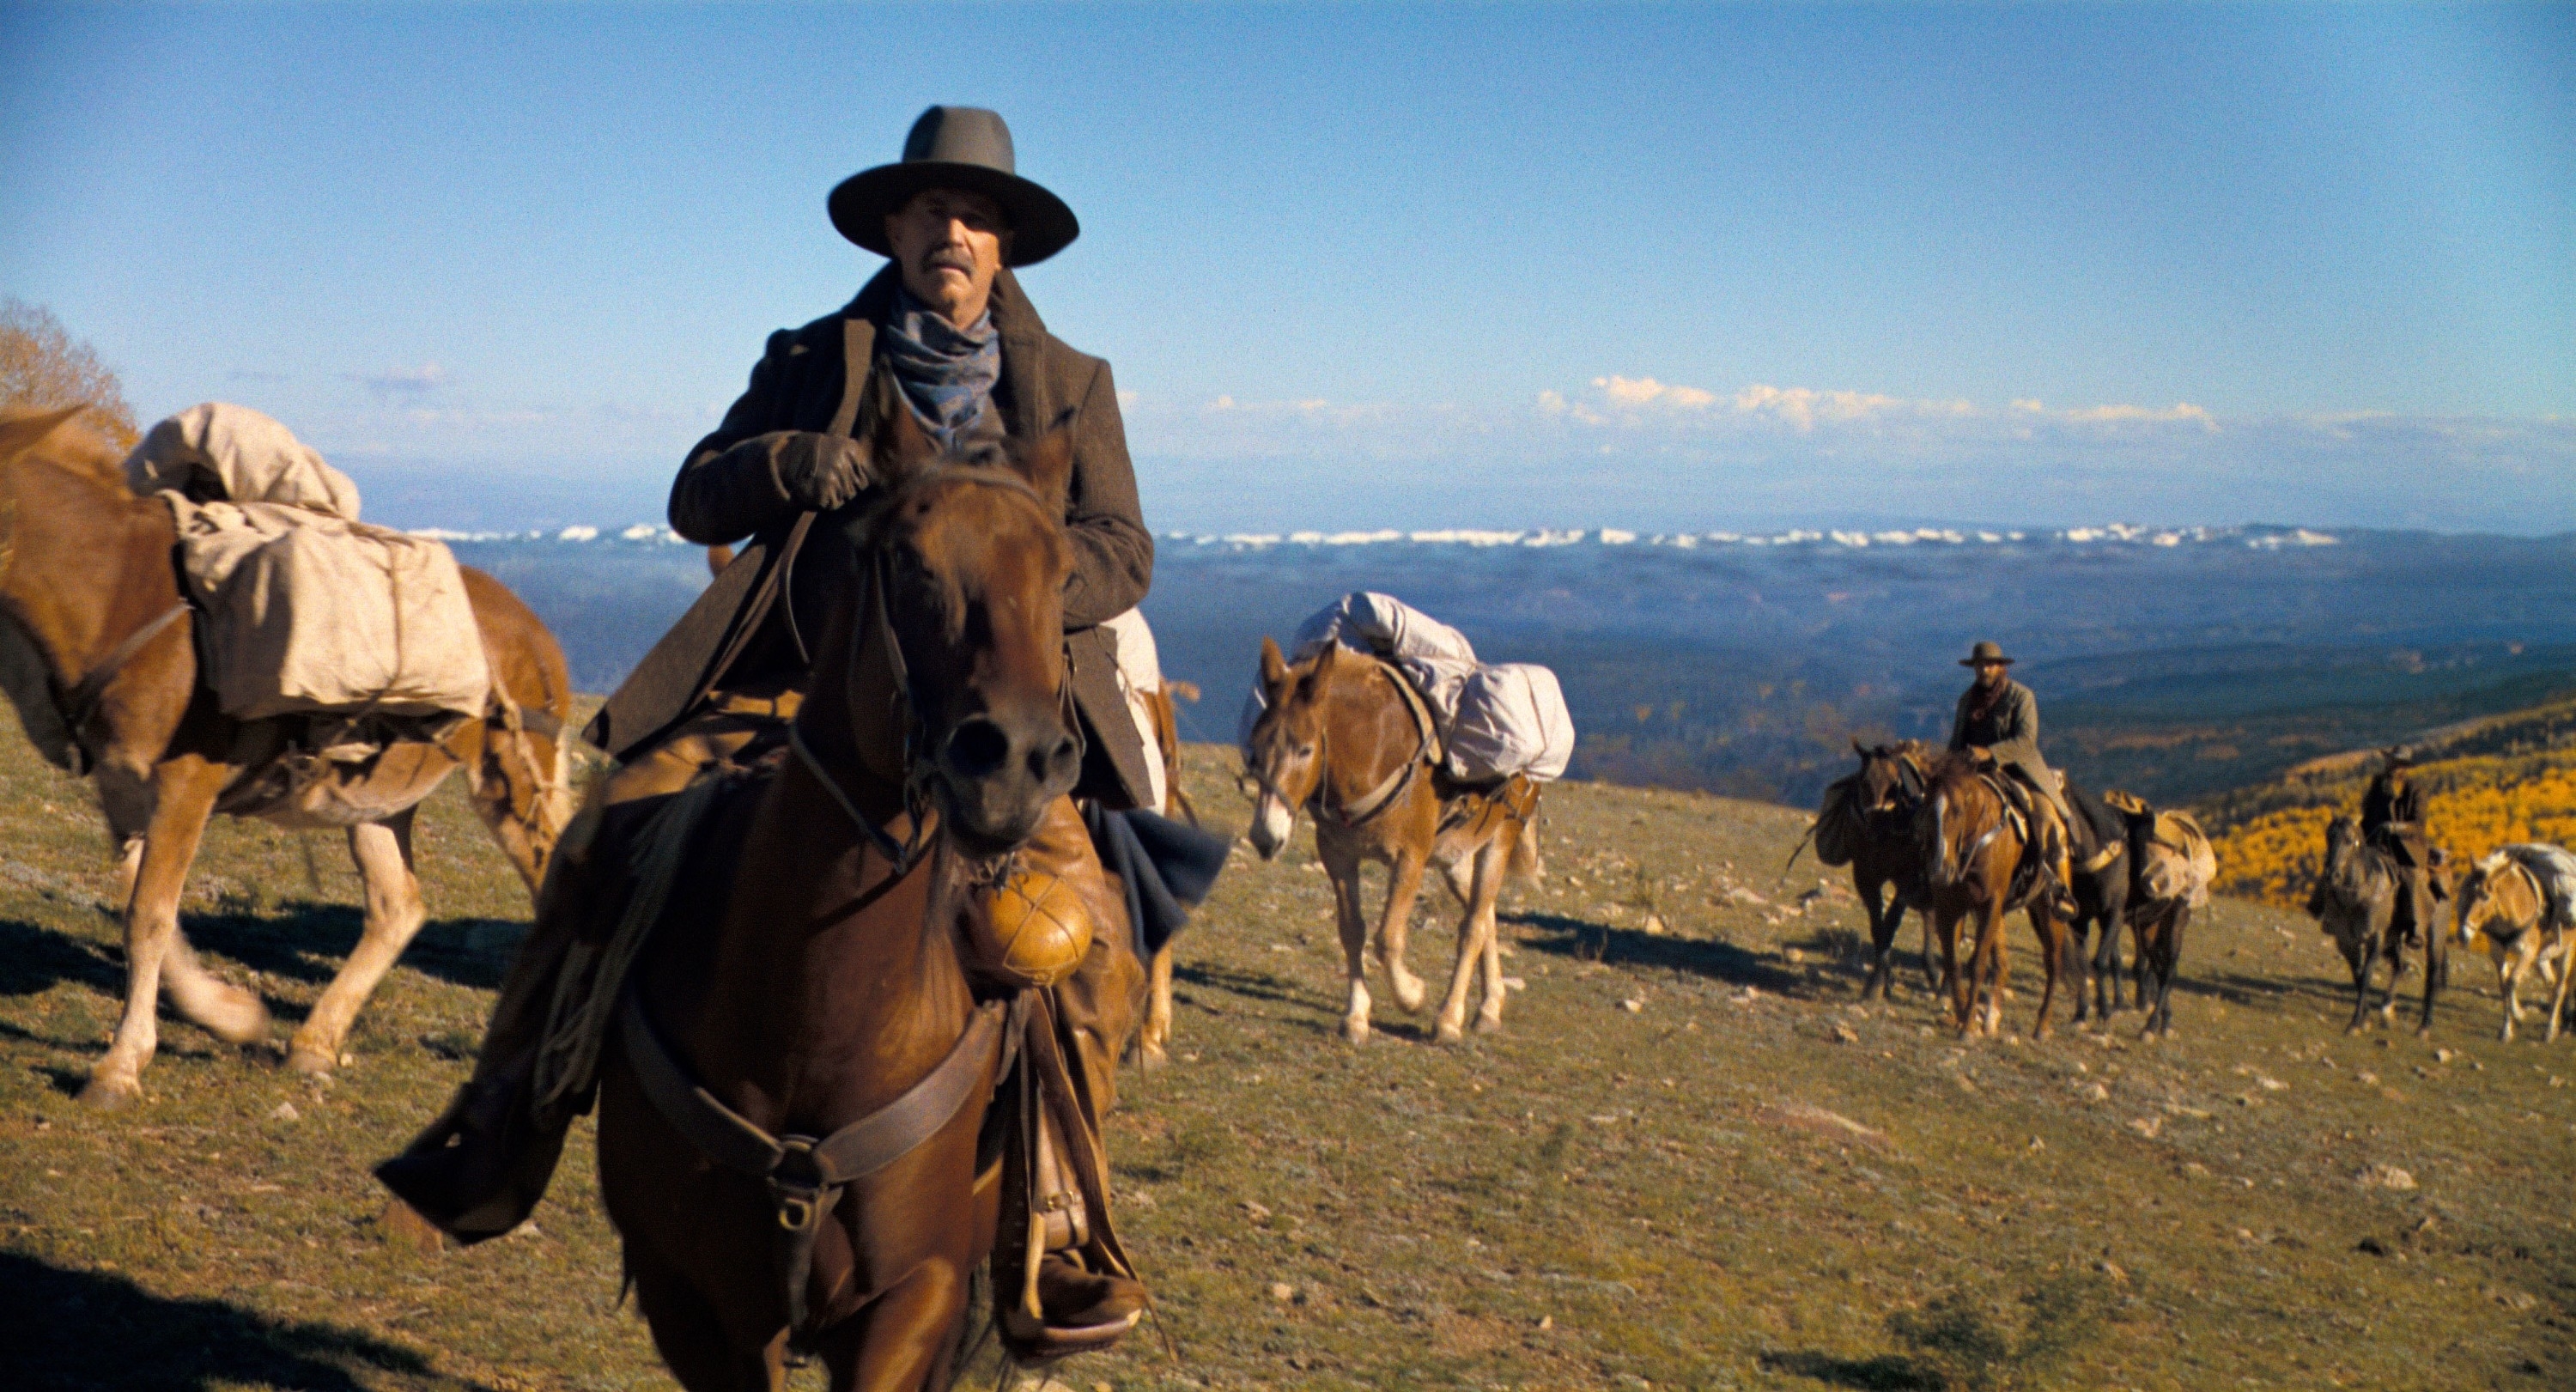 Kevinon horseback with traditional Western attire leading a pack train in a mountainous landscape